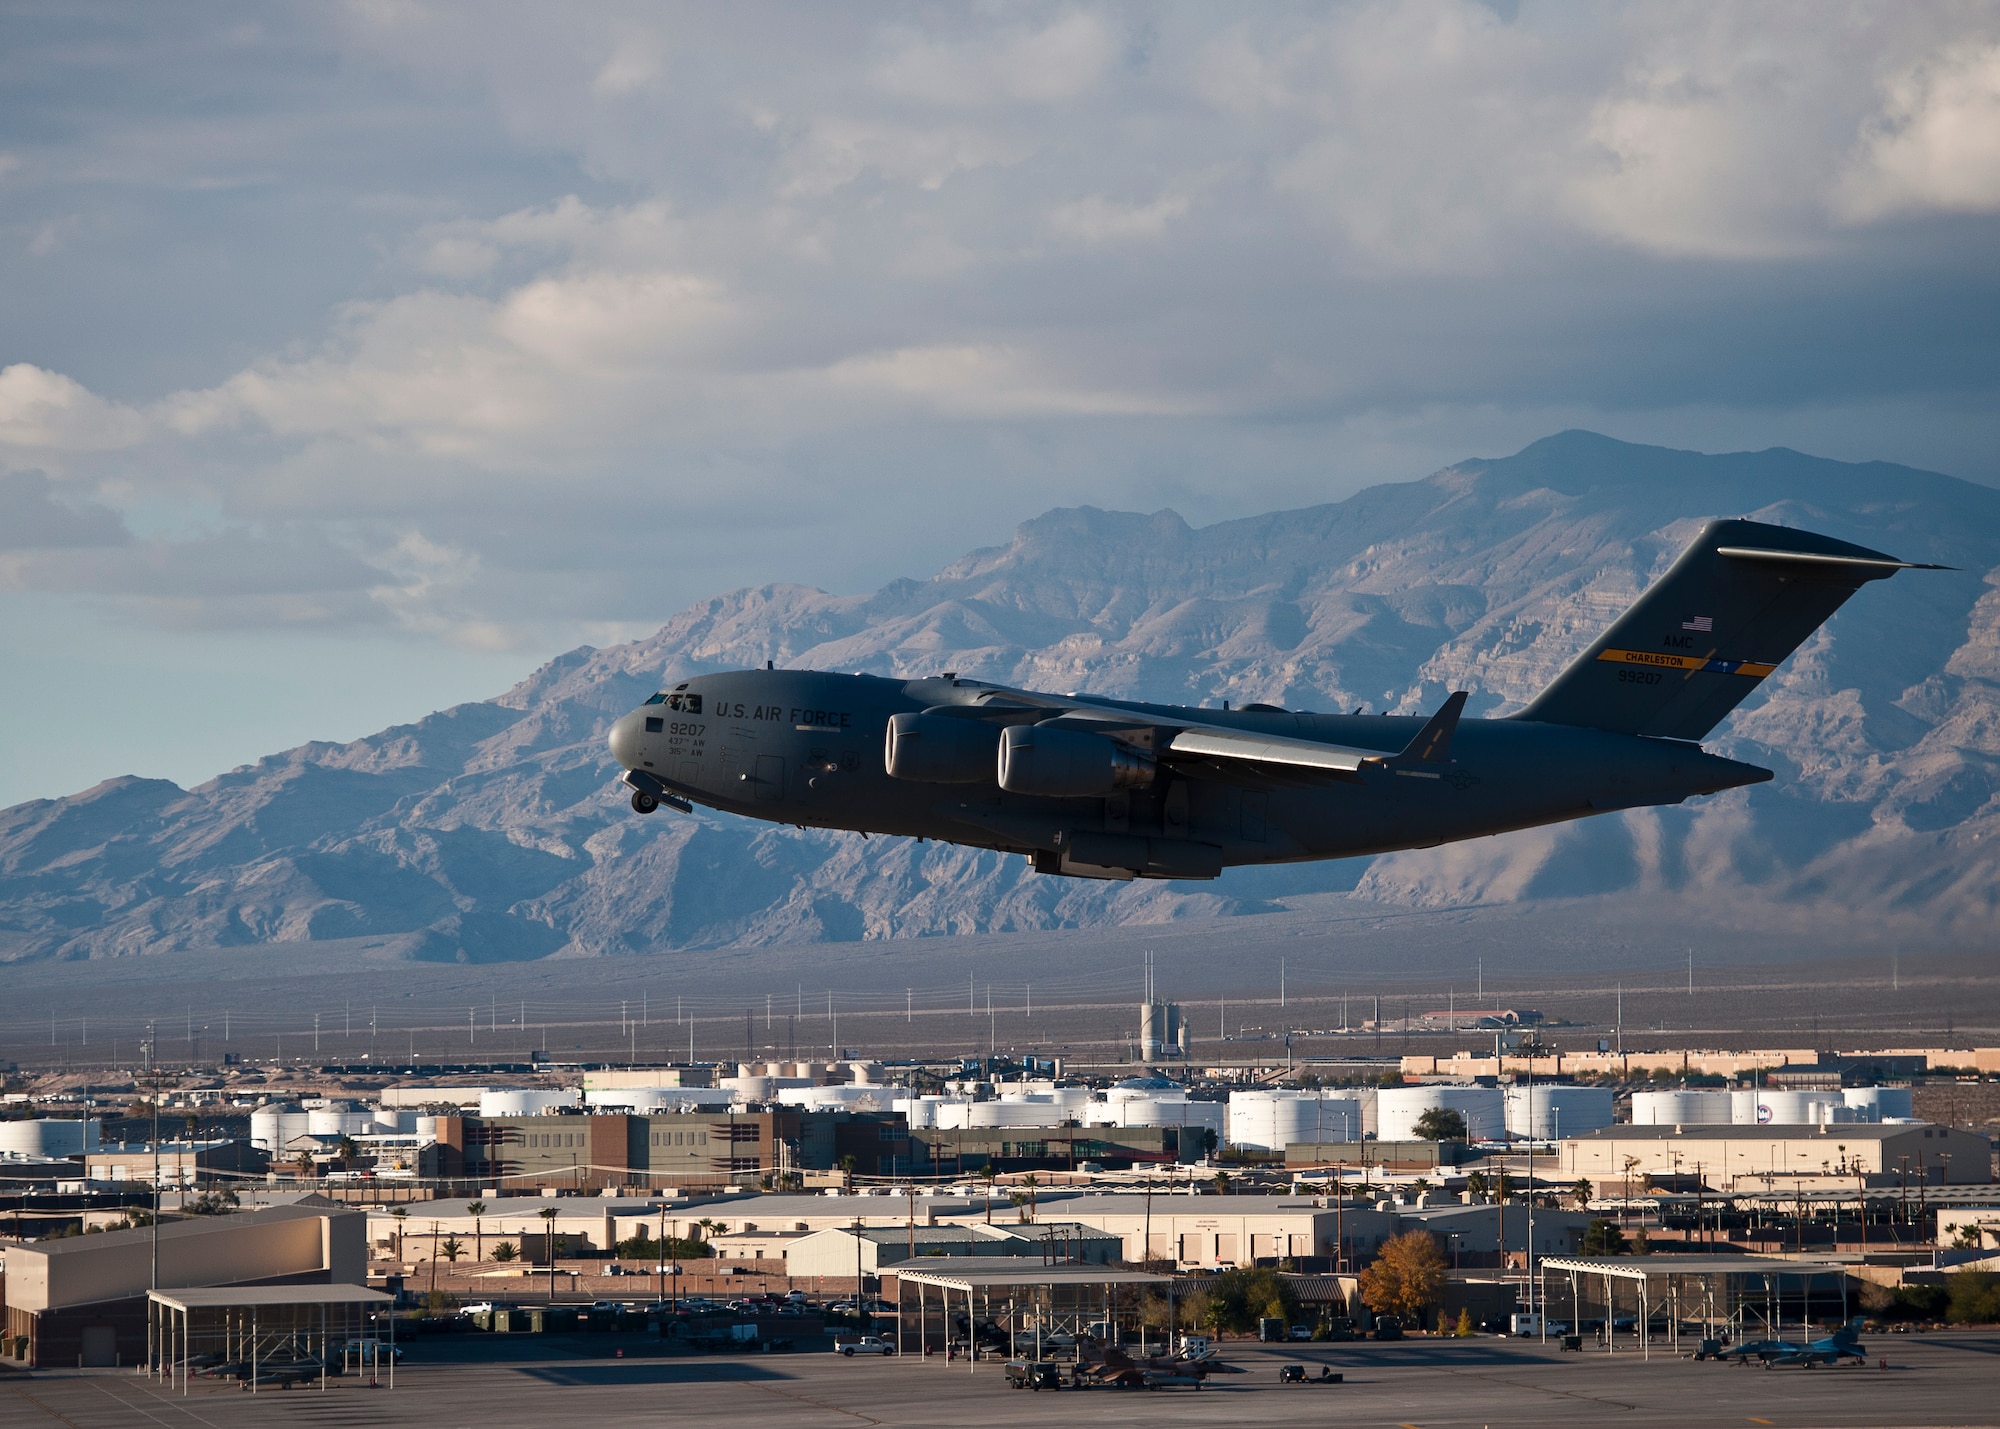 A U.S. Air Force C-17 Globemaster III takes off from Nellis Air Force Base, Nev. during the U.S. Air Force Weapons School's Joint Forcible Entry Exercise 14B Dec. 6, 2014. The C-17 is capable of rapid strategic delivery of troops and all types of cargo to main operating bases or directly to forward bases in the deployment area. (U.S. Air Force photo by Airman 1st Class Mikaley Towle)